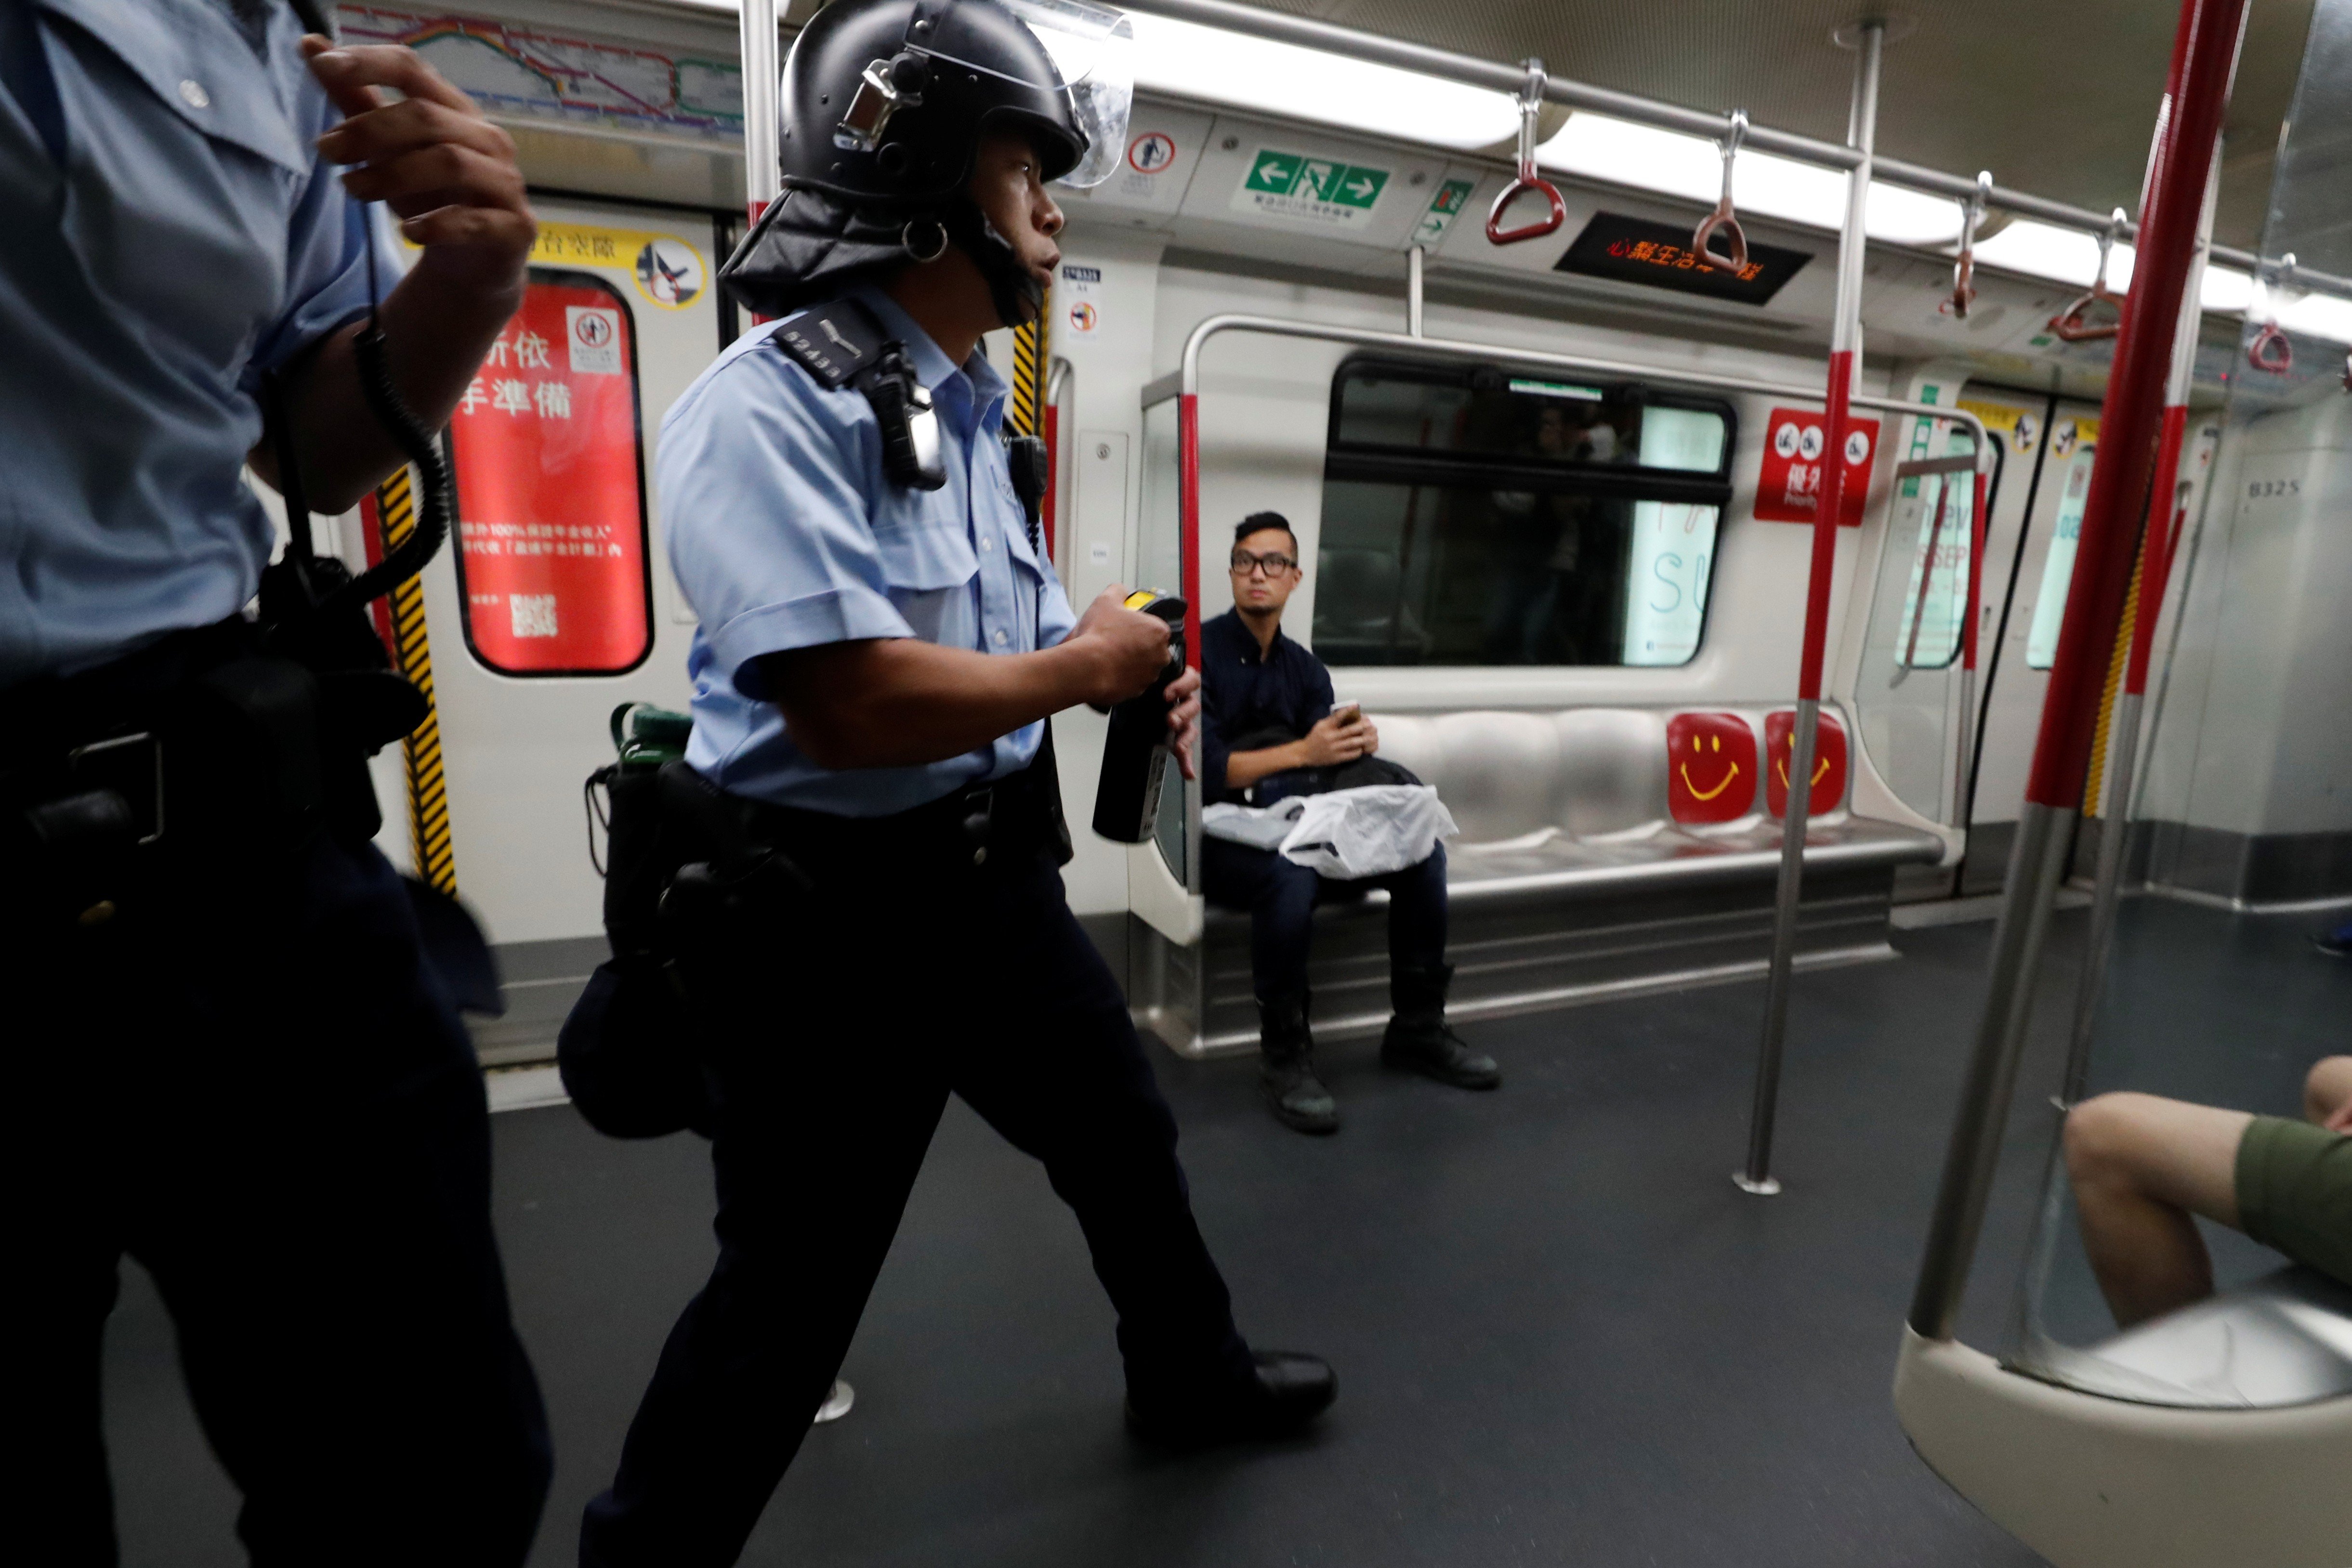 A police officer holds up a can of pepper spray as he searches a Mass Transit Railway train during a protest at Po Lam in Hong Kong. Photo: Reuters